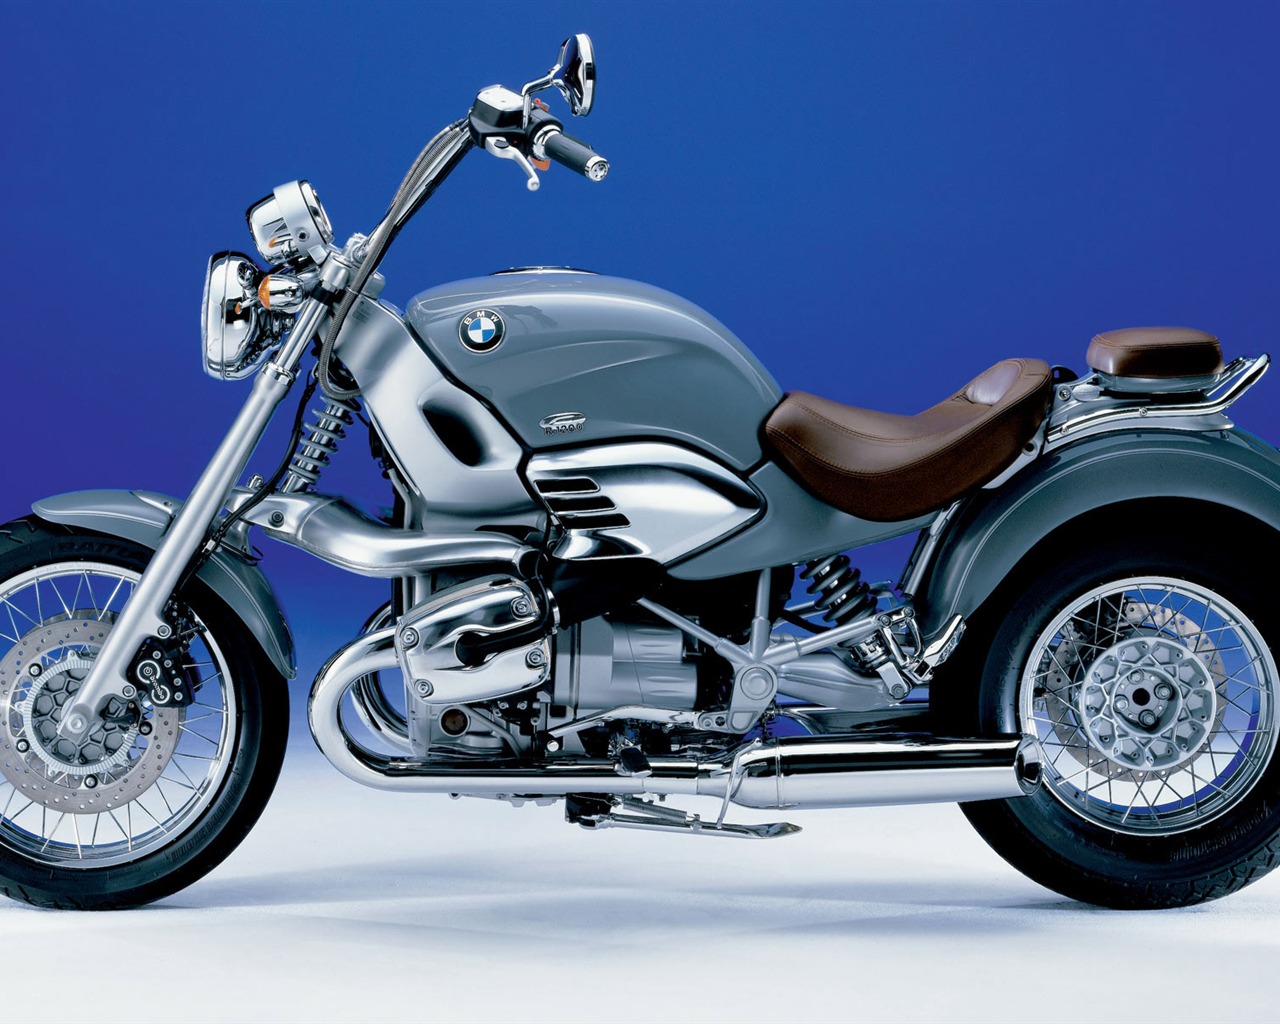 BMW motorcycle wallpapers (4) #17 - 1280x1024